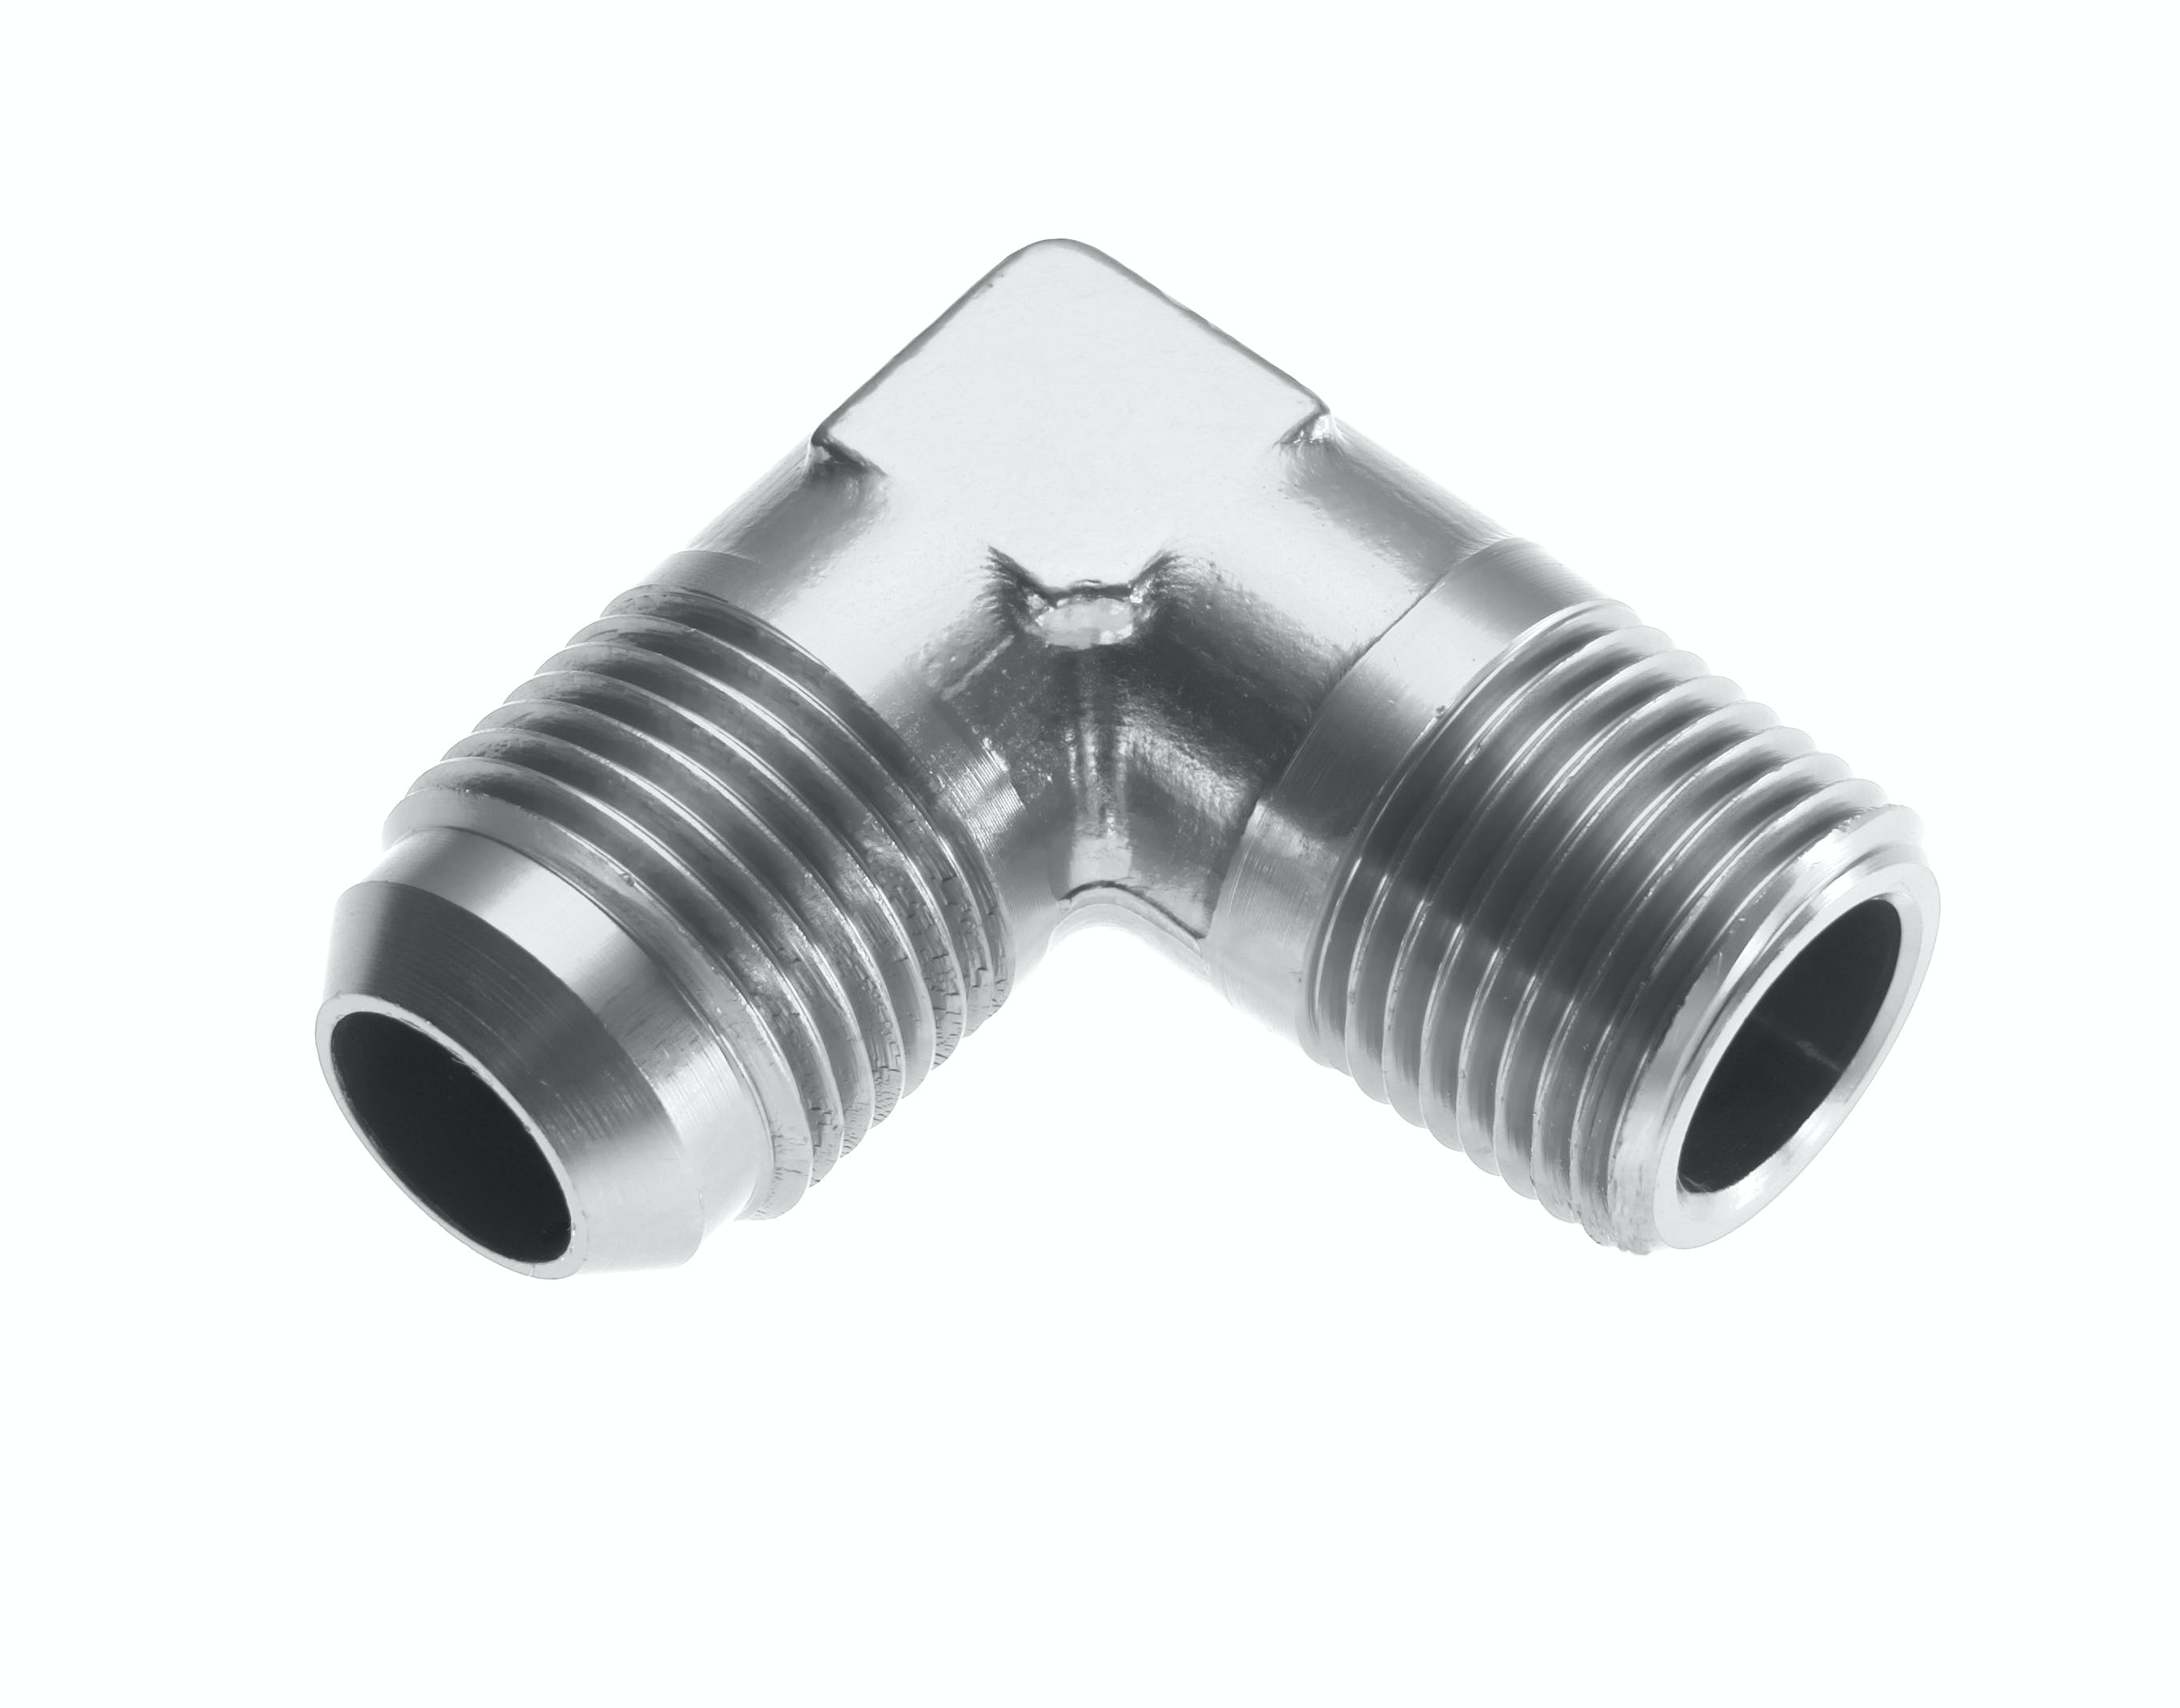 Redhorse Performance 822-16-12-5 -16 90 degree Male adapter to -12 (3/4in) NPT Male - clear